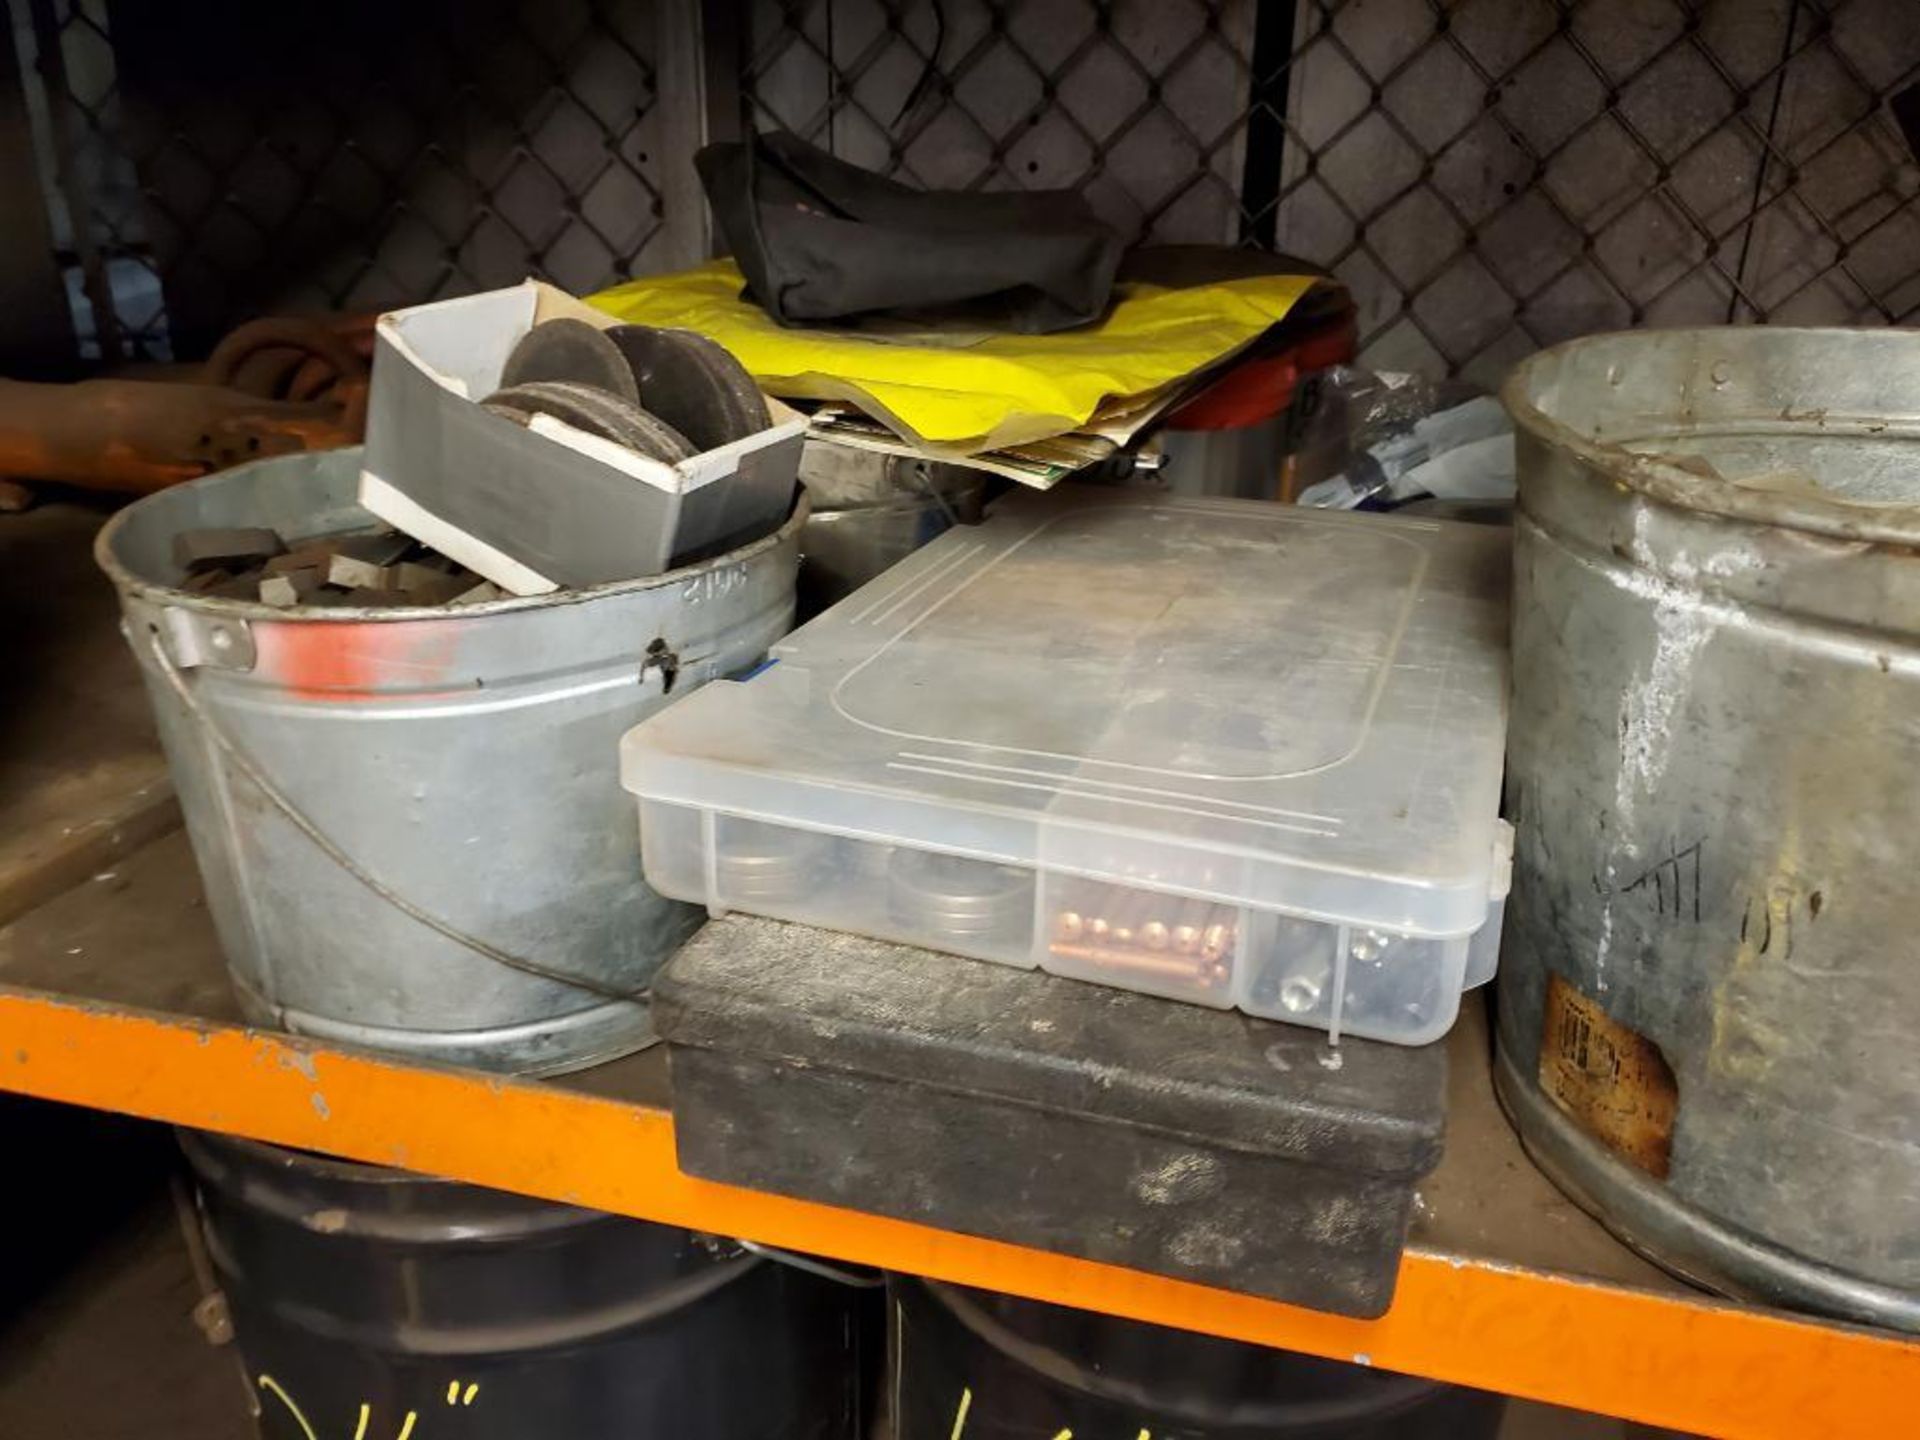 CONTENTS OF SHELVING UNIT, METABO GRINDERS, MILWAUKEE DEEP CUT BAND SAWS, PNEUMATIC METAL CUTTING SA - Image 16 of 18